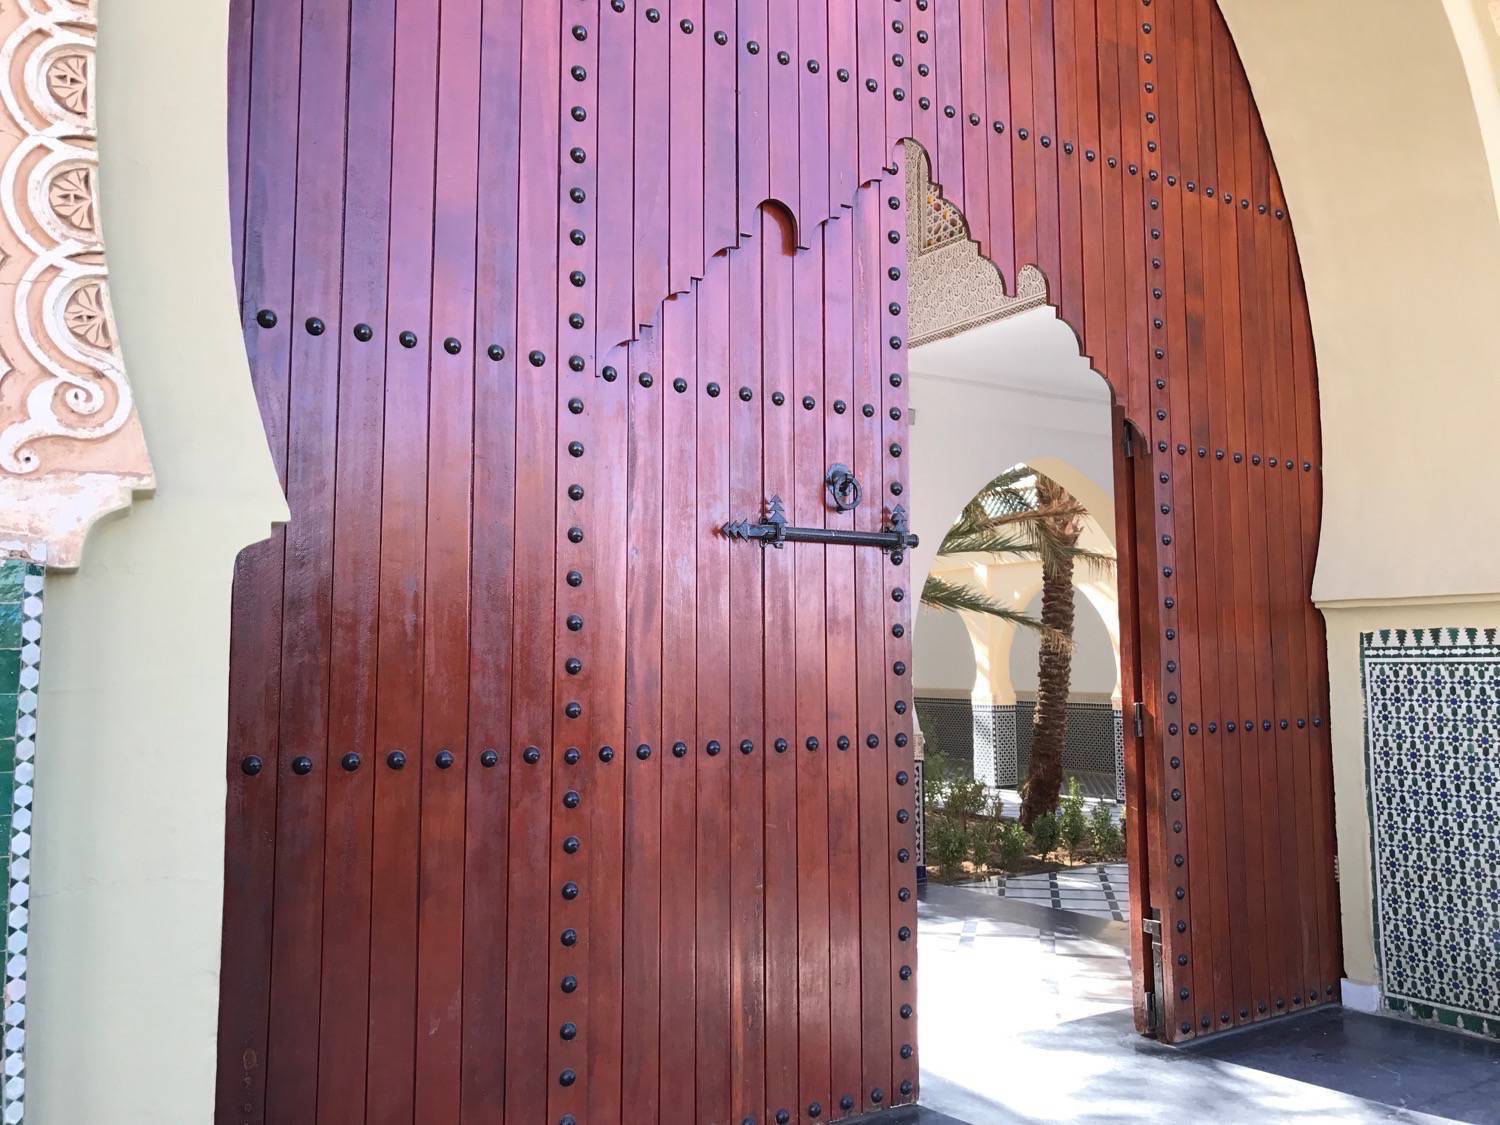 Close up of the main wooden gate leading to the Moulay Ali Cherif mausoleum complex